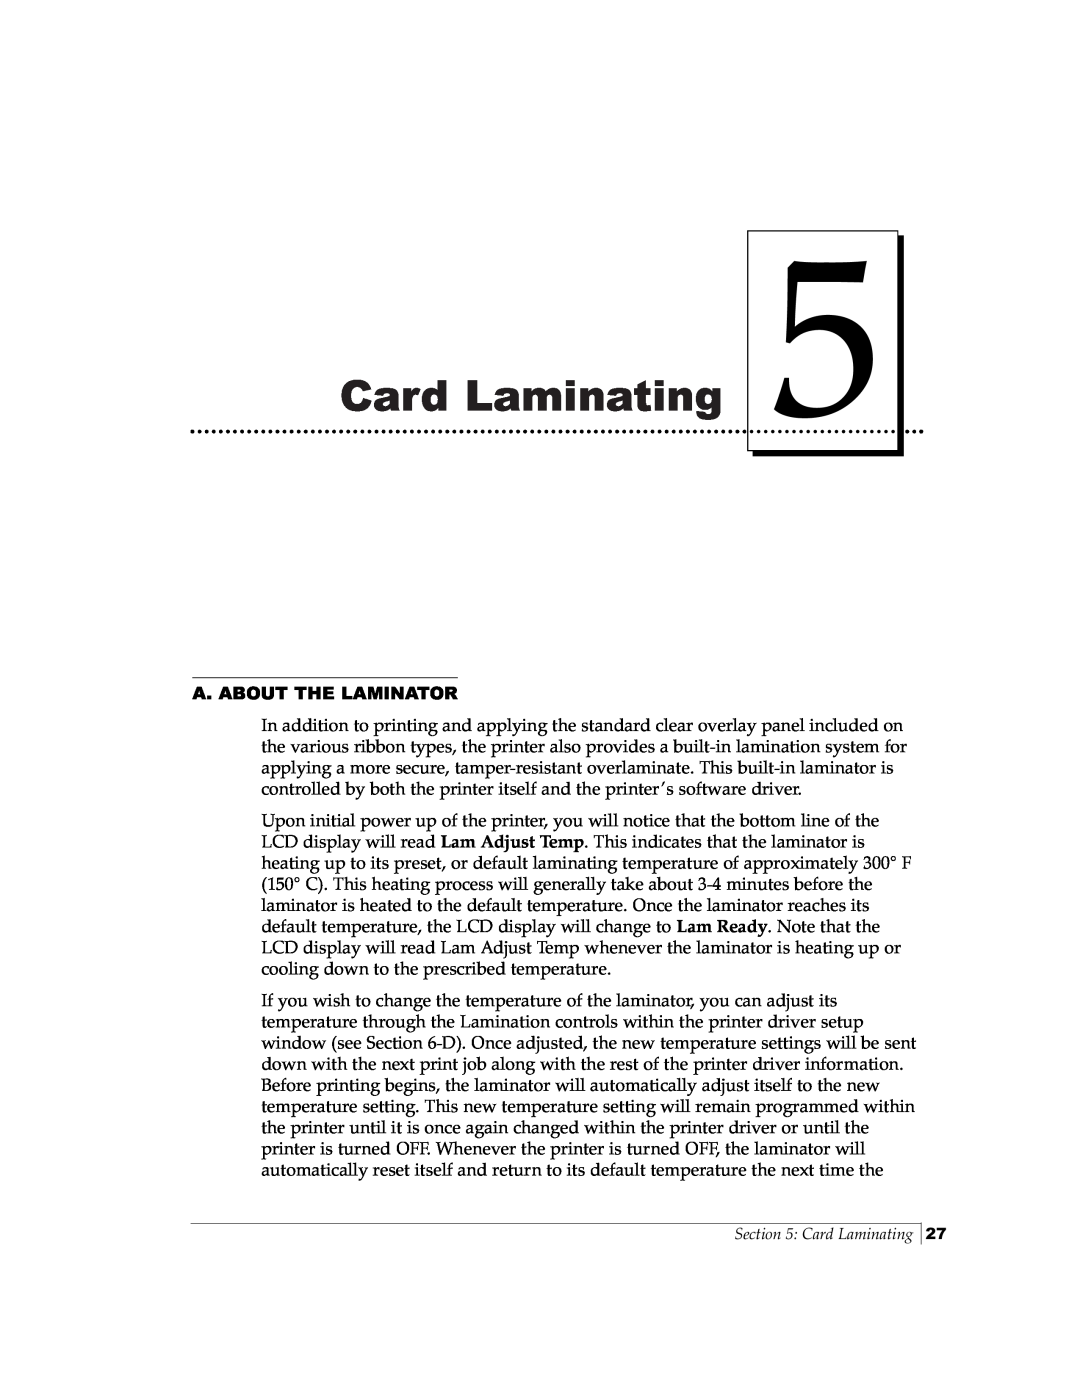 FARGO electronic Pro-L manual Card Laminating, A. About The Laminator 